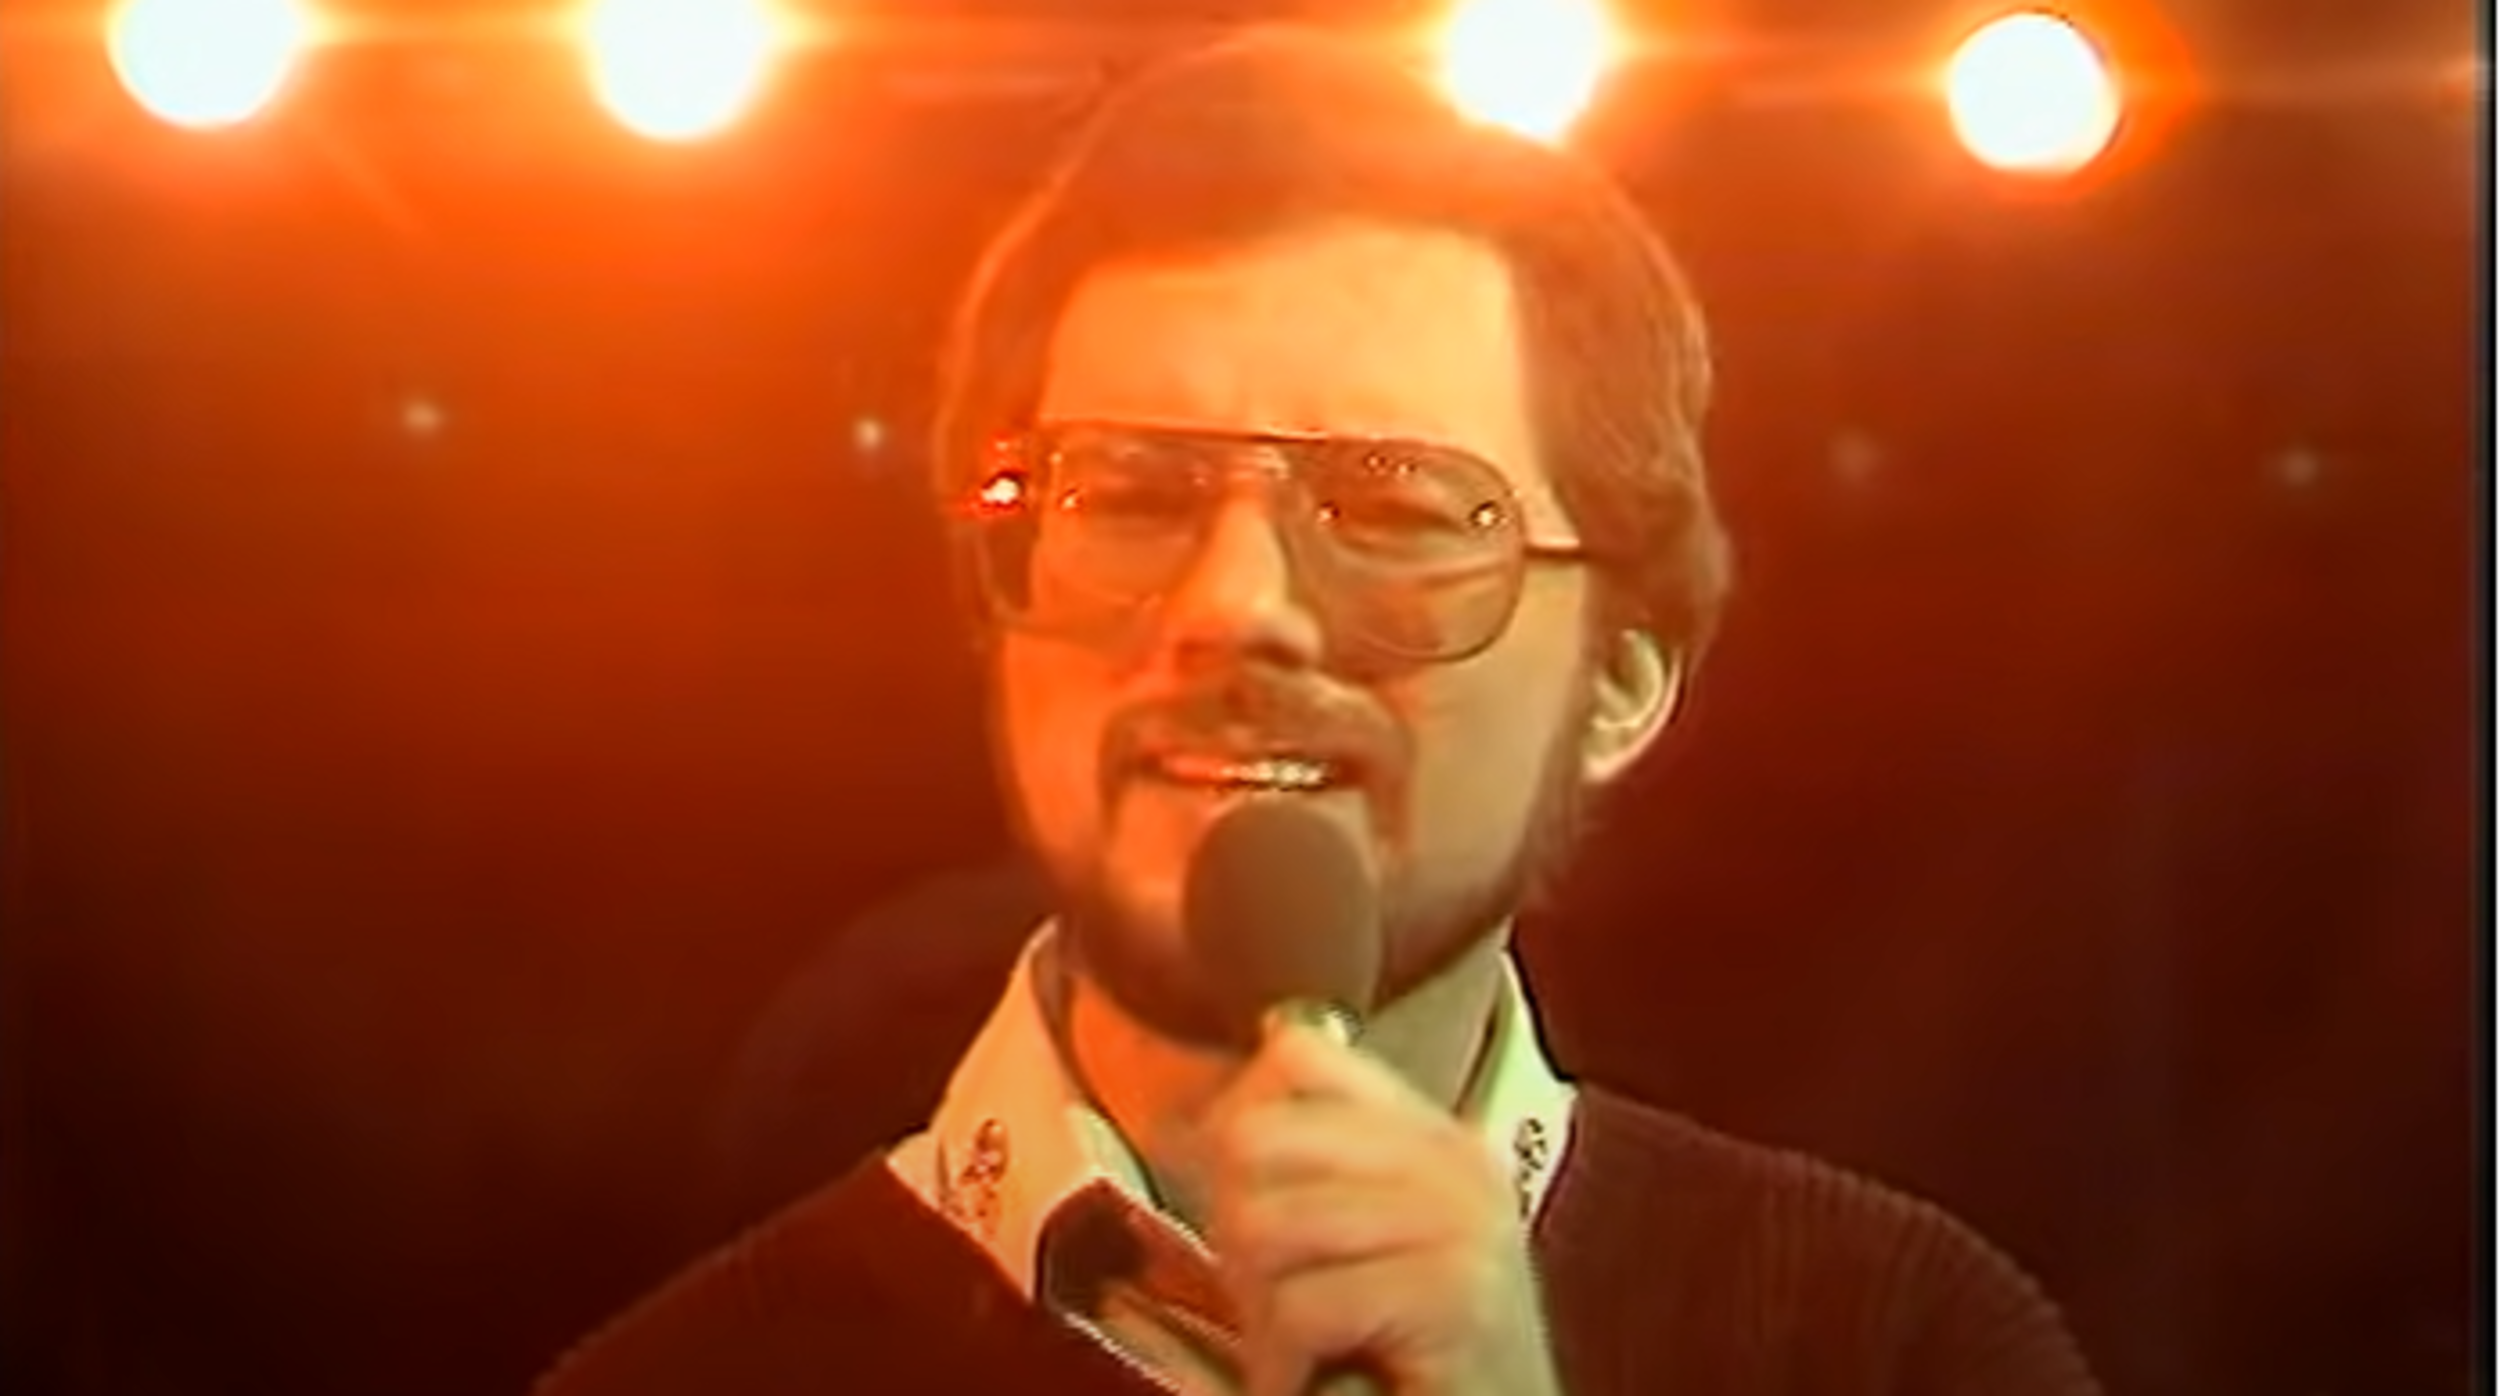 <p>This No.1 <em>Billboard</em> Hot 100 hit for England's Rupert Holmes has achieved a steady cult following over the years. Perhaps, because of the unique title and conjured images of some warm, beach-laden paradise. Yacht rock's association with summer, water, and care-free living, as a backdrop to a romantic story, is one of its appealing aspects. This <a href="https://www.youtube.com/watch?v=zROIlspgOjM">song is about a couple who ultimately patch up a rough relationship through personal ads</a>. Any time somebody of a certain age sips one of these drinks, ideally at some Caribbean resort with the warm winds off the ocean blowing, "The Pina Colada Song" should come to mind.</p><p>You may also like: <a href='https://www.yardbarker.com/entertainment/articles/the_most_memorable_agatha_christie_adaptations_011124/s1__37680481'>The most memorable Agatha Christie adaptations</a></p>